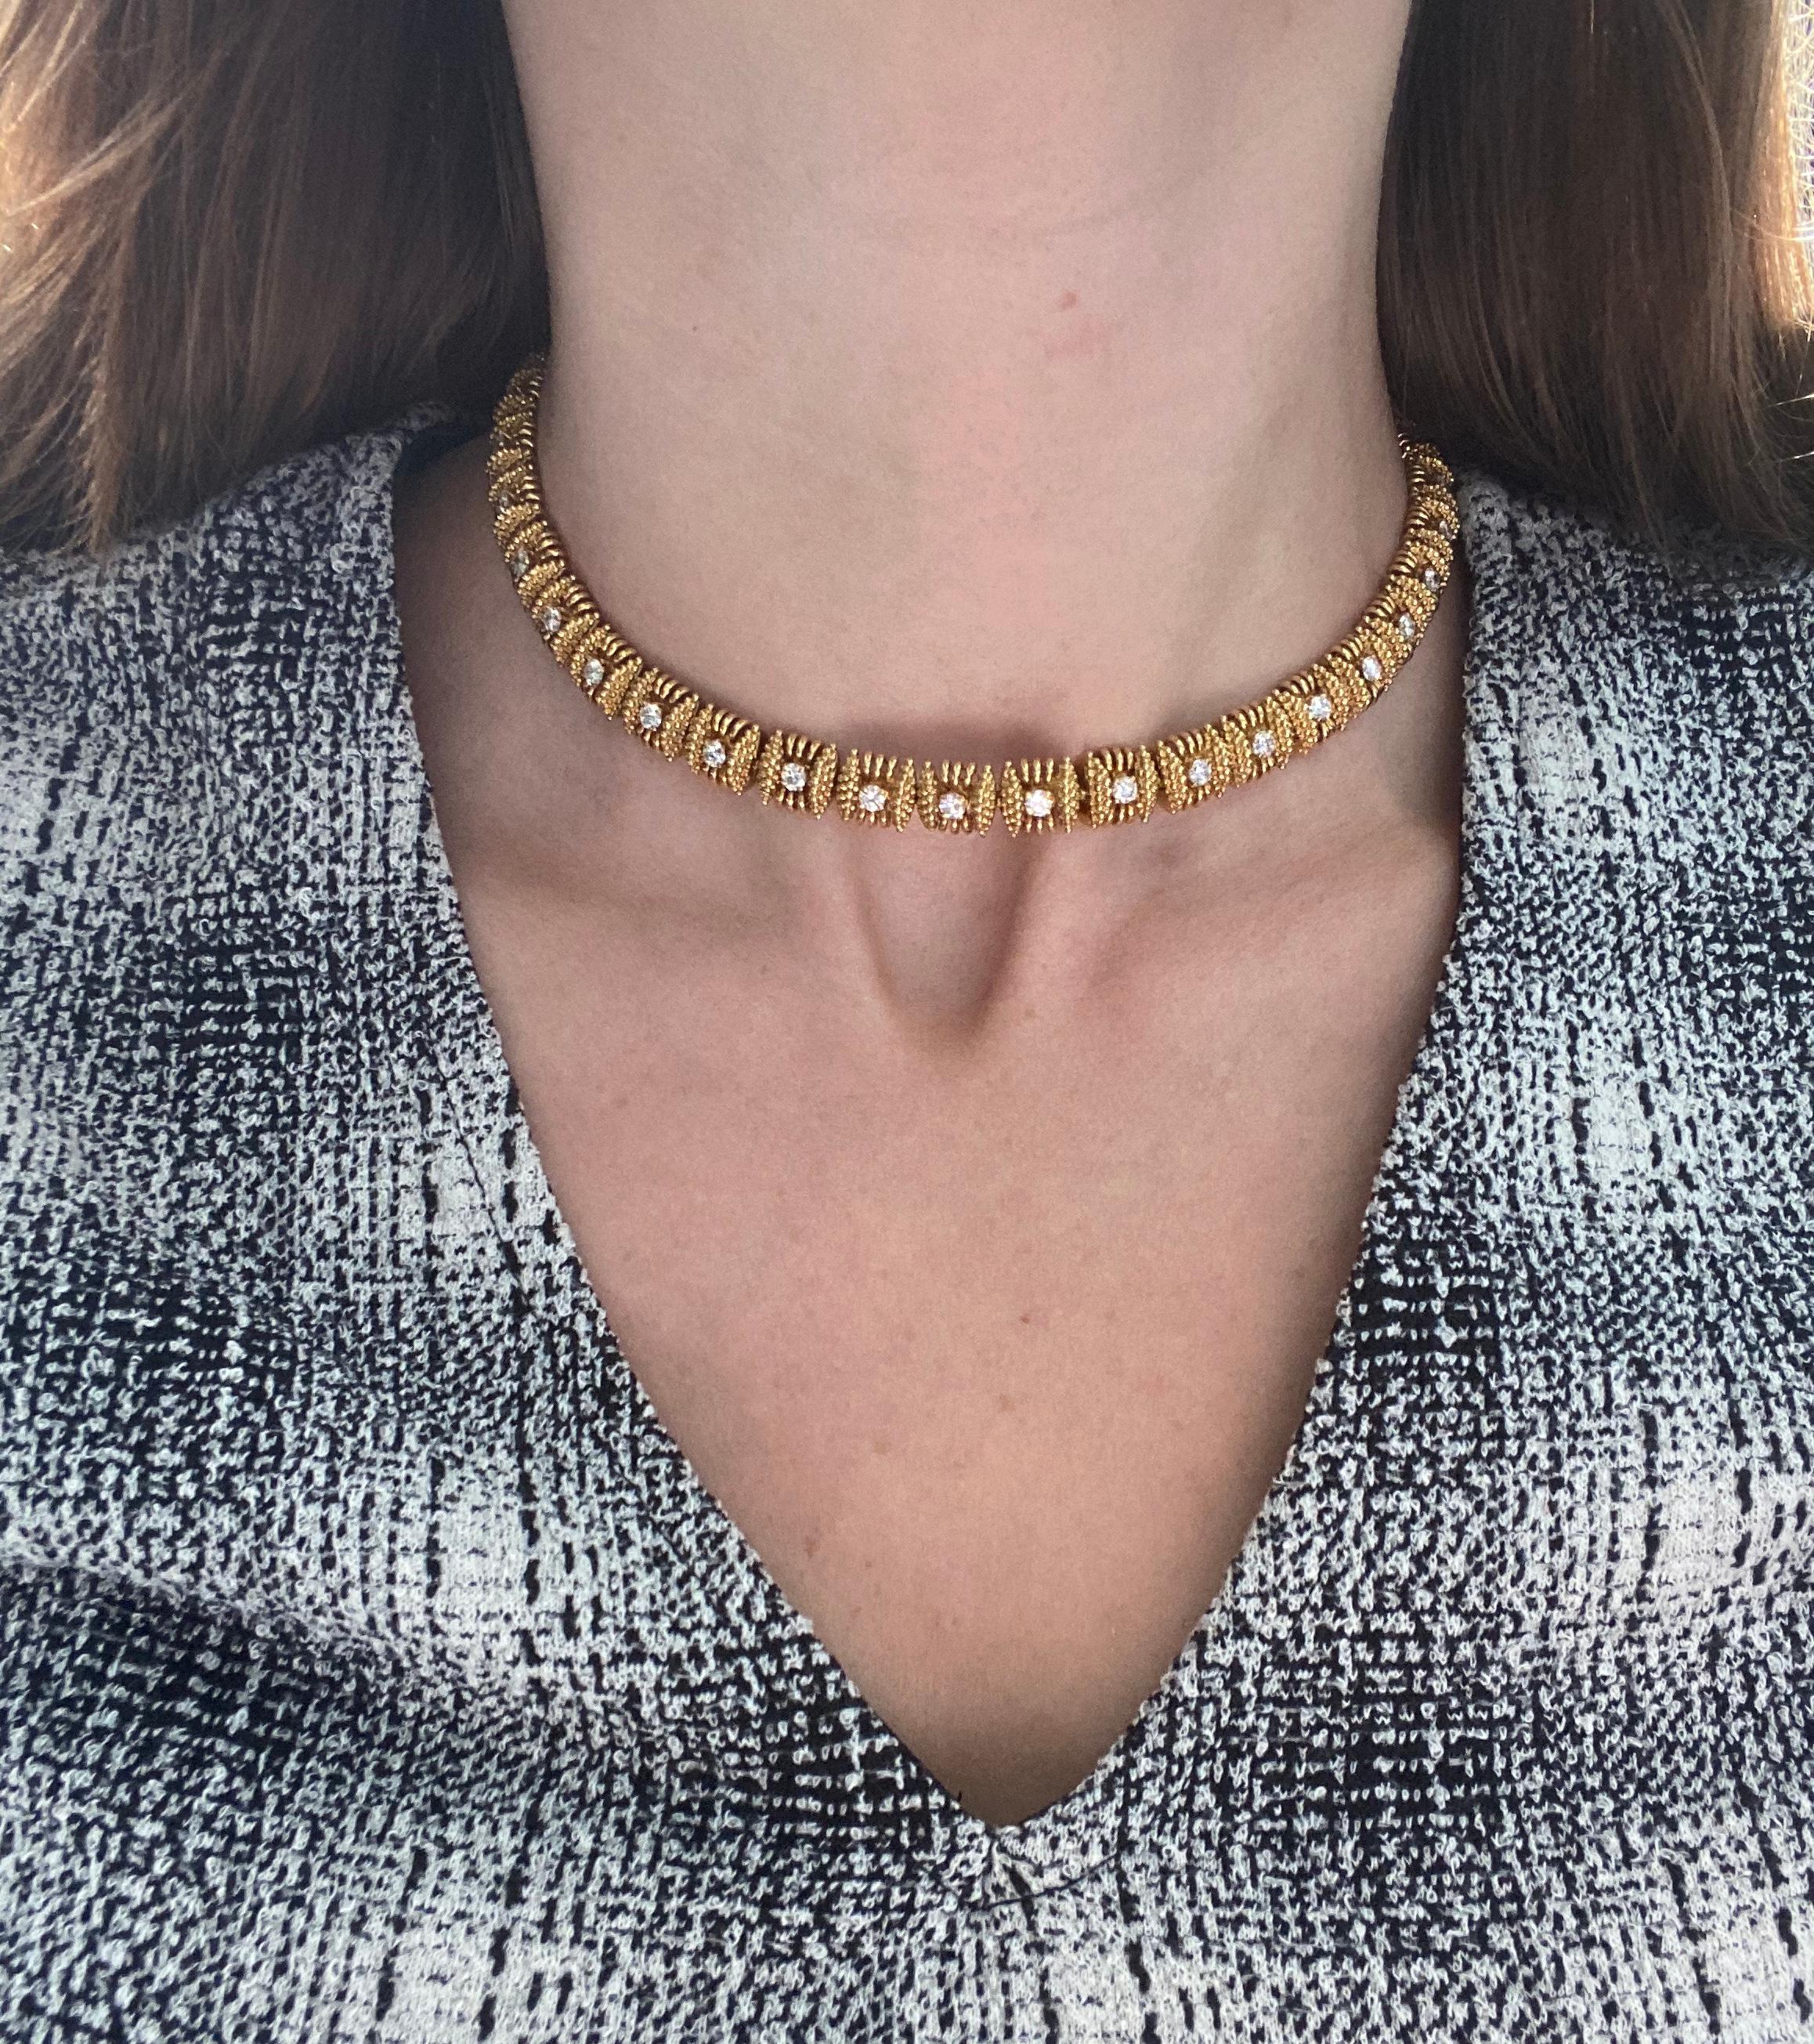 Gold and Diamond Necklace by Tiffany & Co. This necklace has beaded and polished wire links centering 37 round diamonds weighing approximately 4.25 carats all set in 18k yellow gold. Weght: 89 grams;
Signed Tiffany & Co.
 Length: 14 1/2 inches.